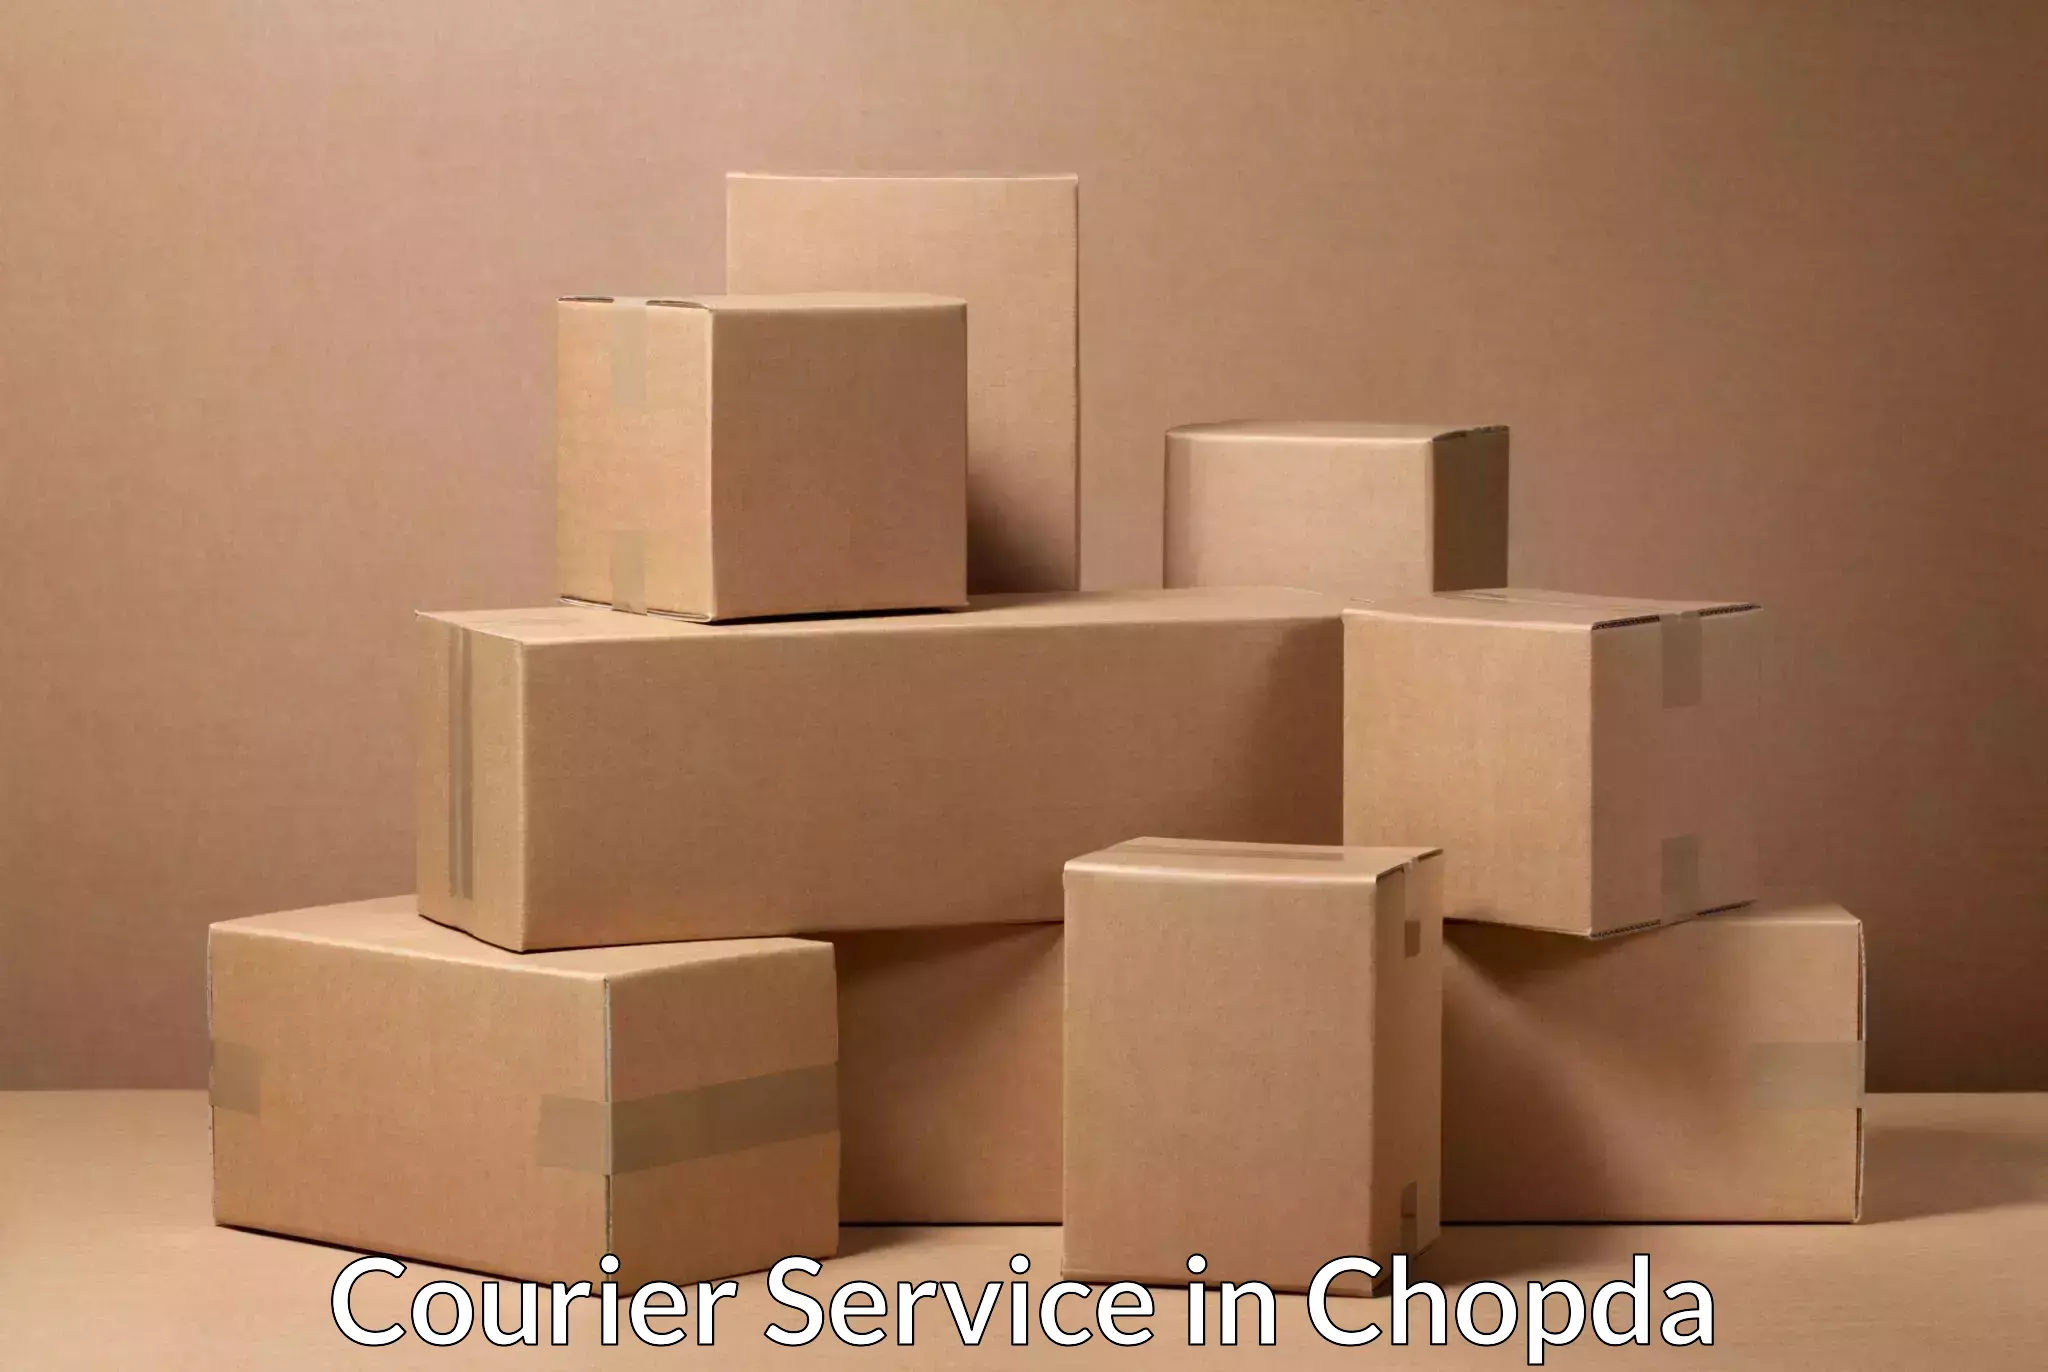 Global delivery options in Chopda